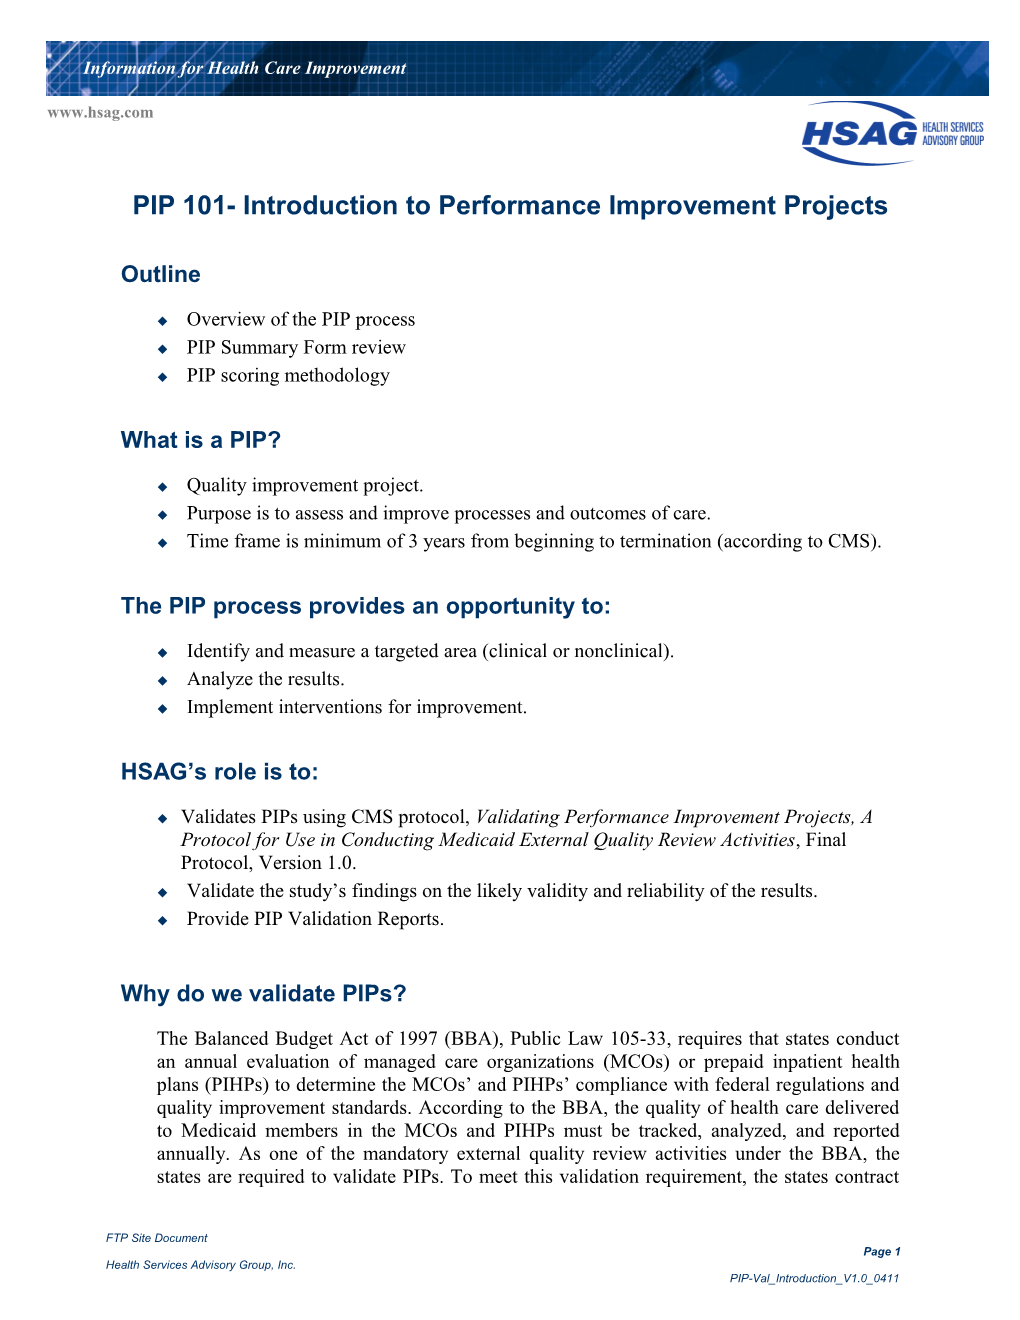 Introduction to Performance Improvement Projects